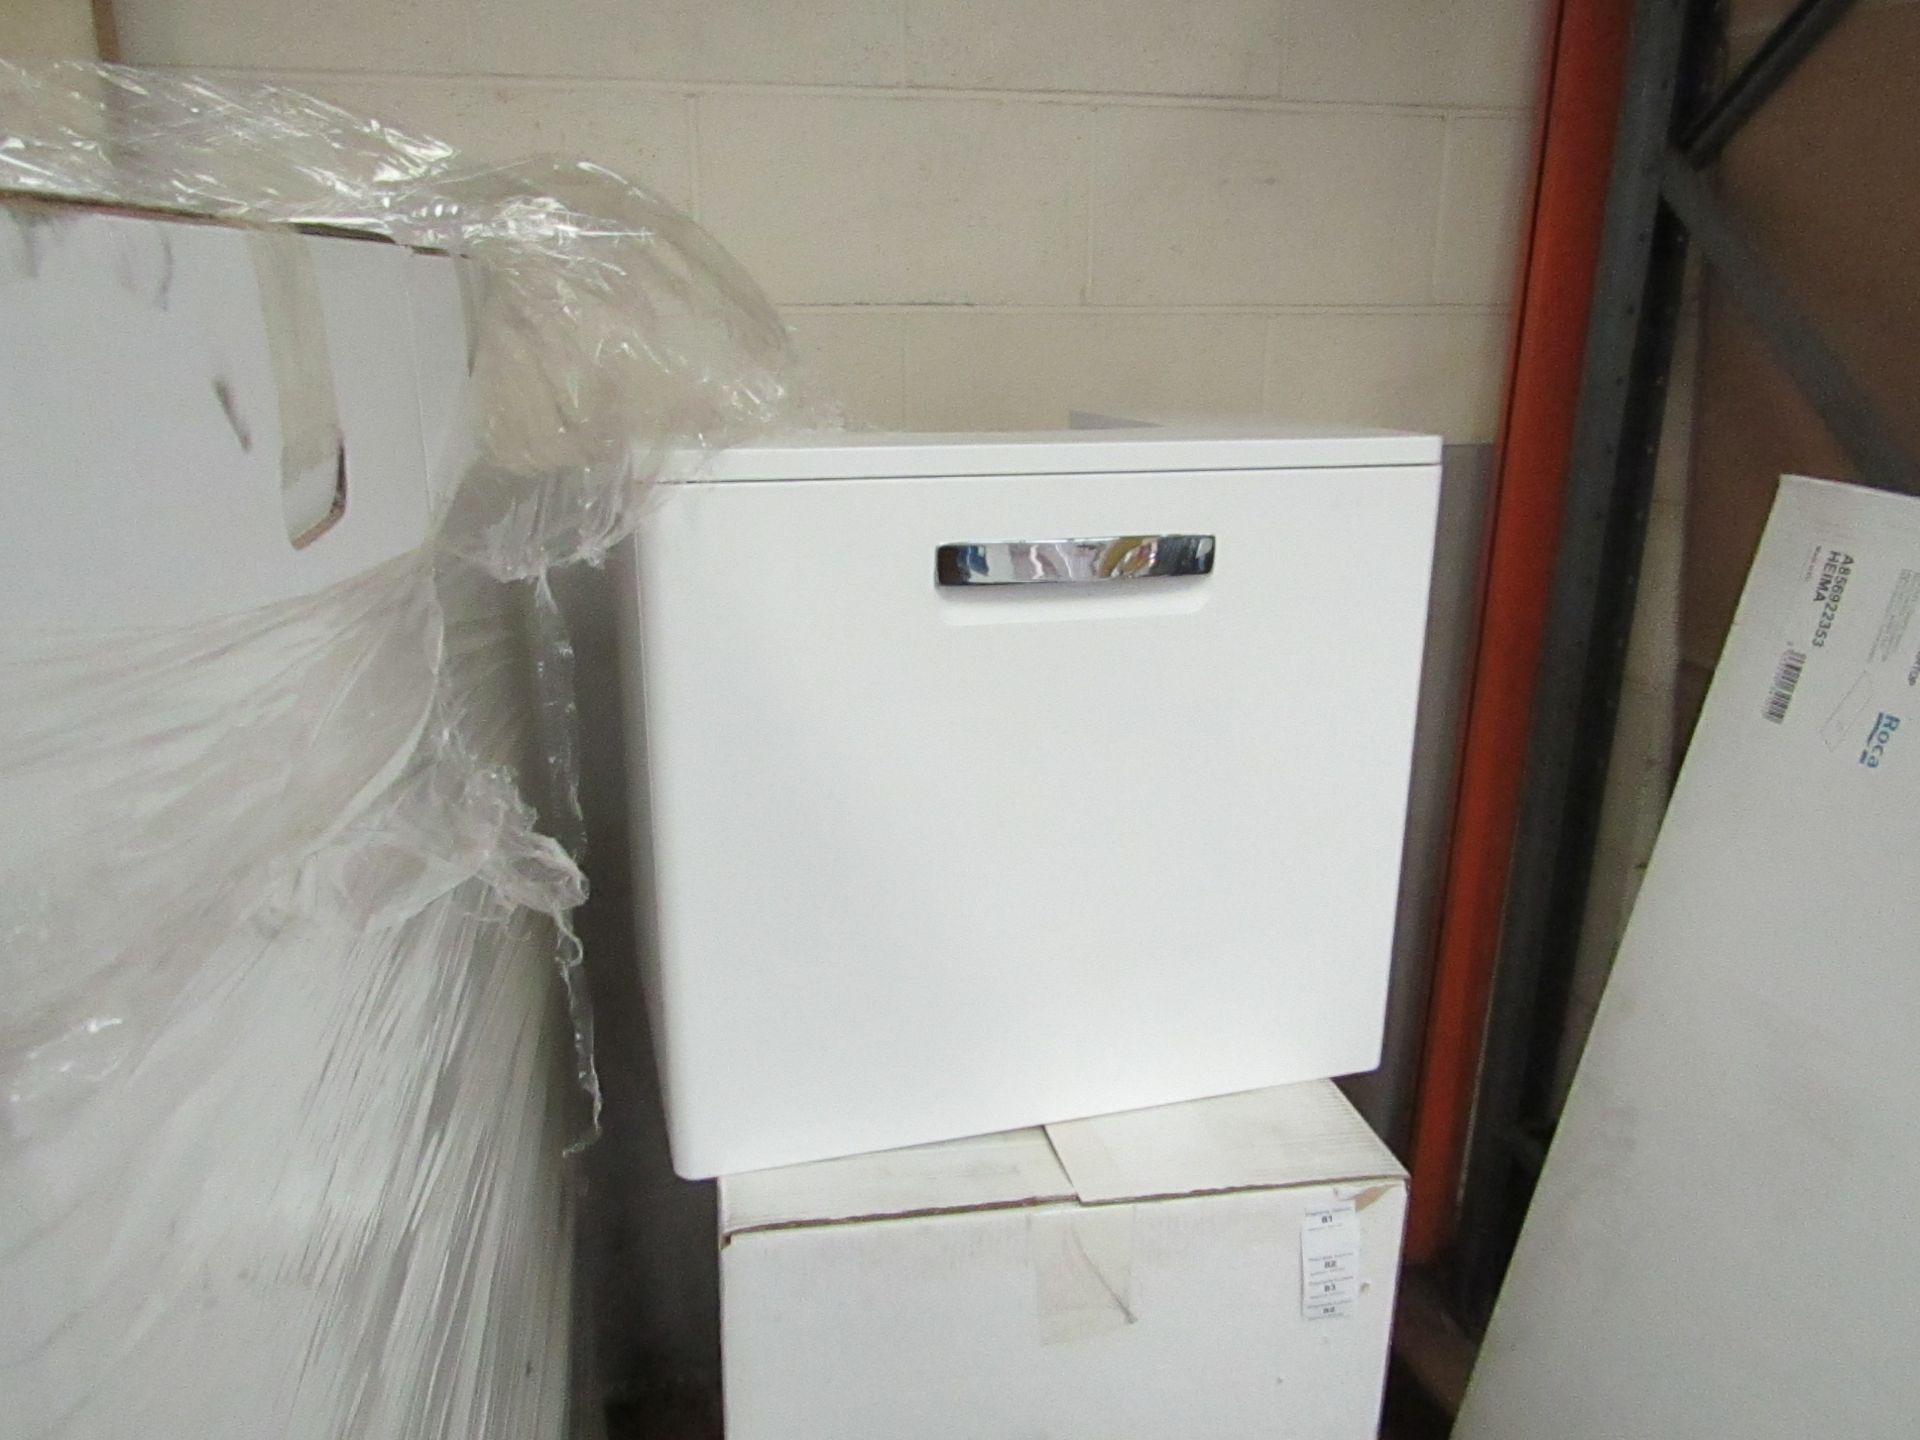 Roca The Gap 600mm basin unit, new and boxed, RRP £320